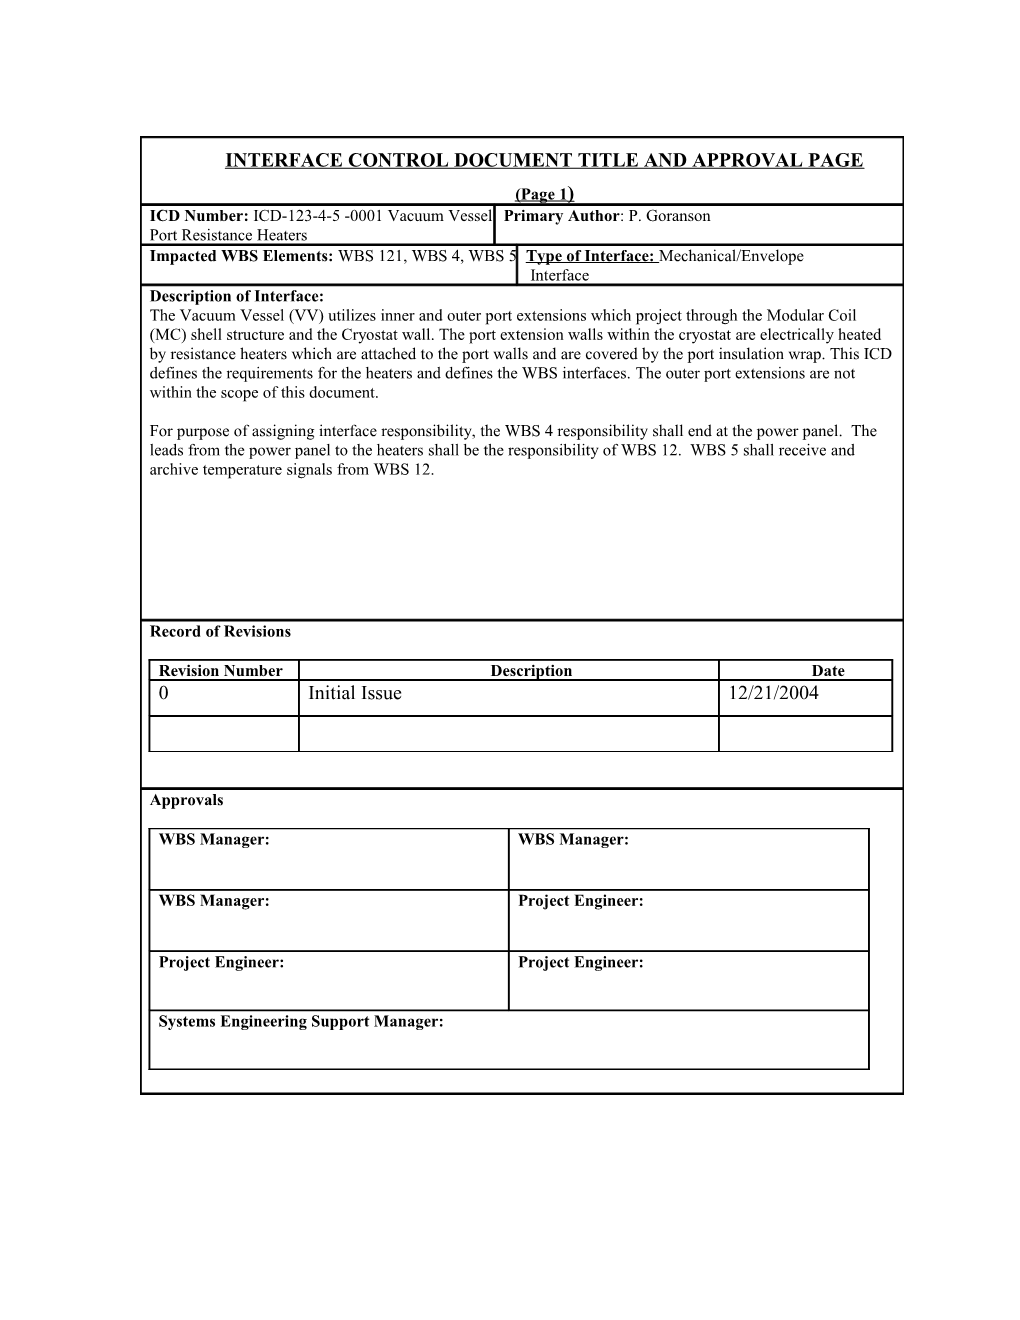 Interface Control Document Title and Approval Page s1